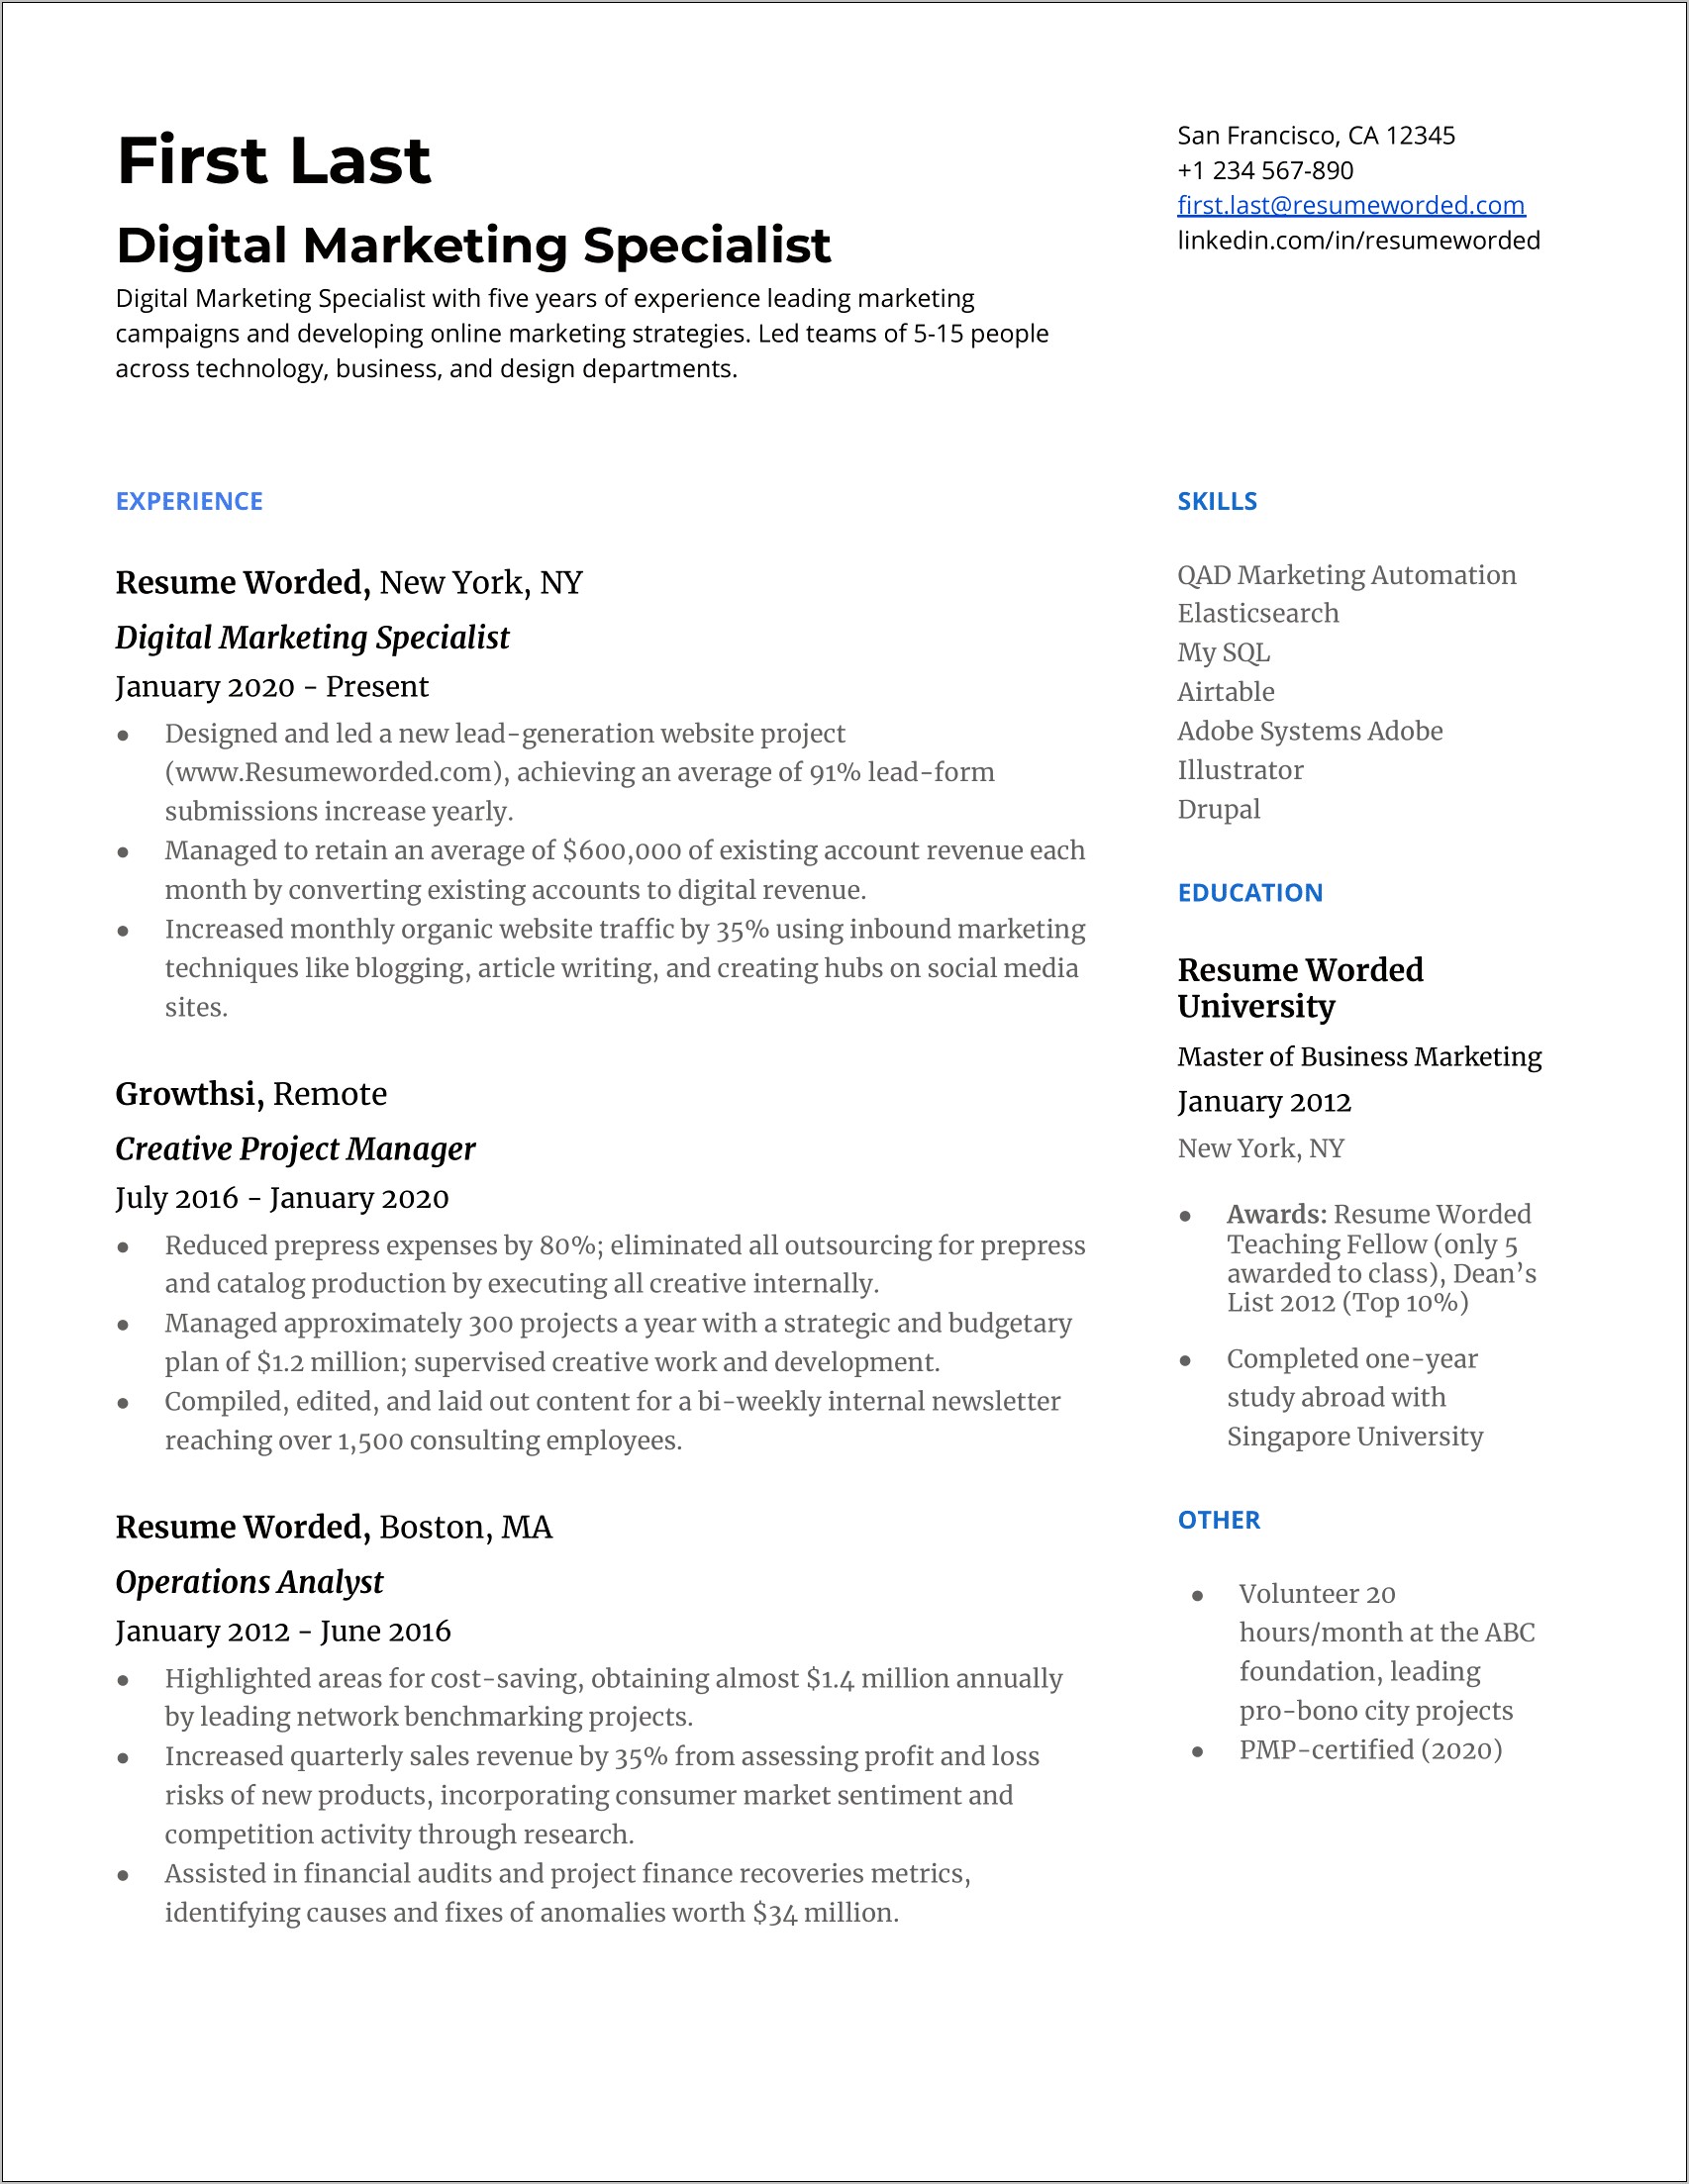 Marketing Resume Bullet Point Examples